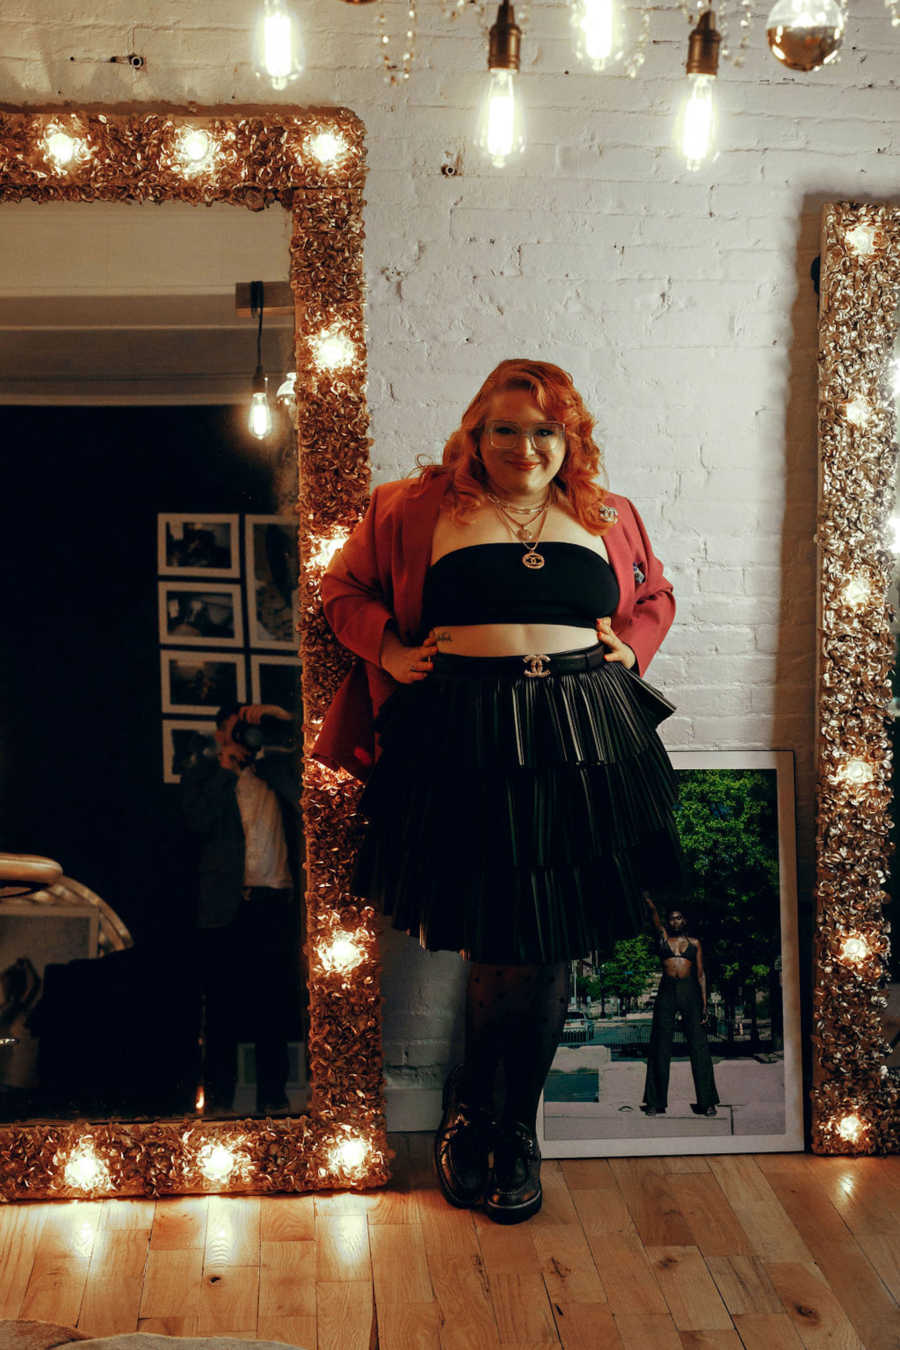 Woman wearing black crop top and skirt with hands on hips smiling in front of mirror and lights